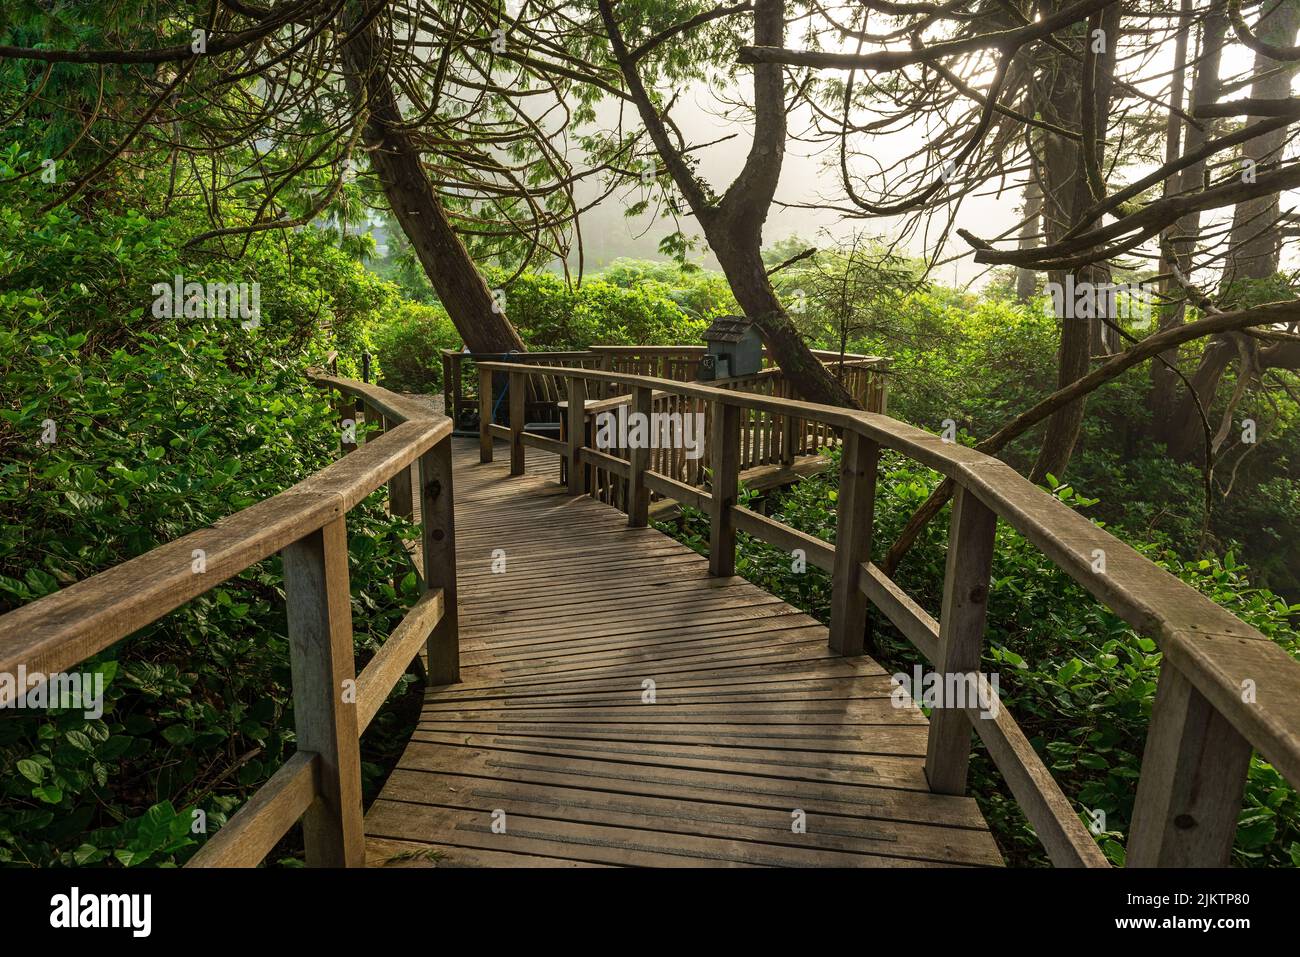 Elevated wooden walkway in an ancient forest near Tofino, Vancouver Island, British Columbia, Canada. Stock Photo